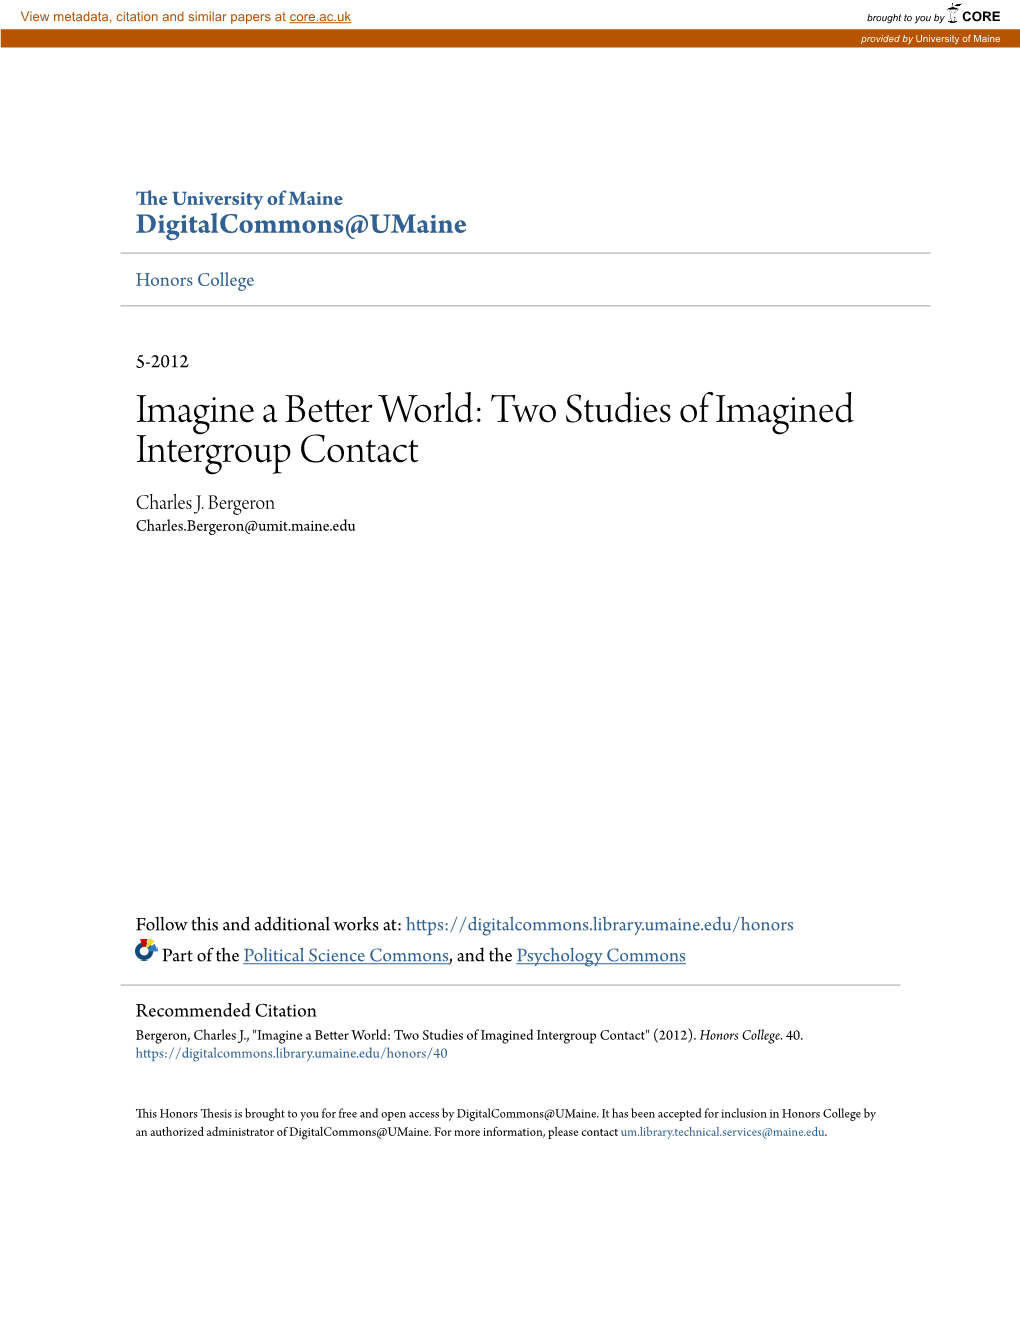 Two Studies of Imagined Intergroup Contact Charles J